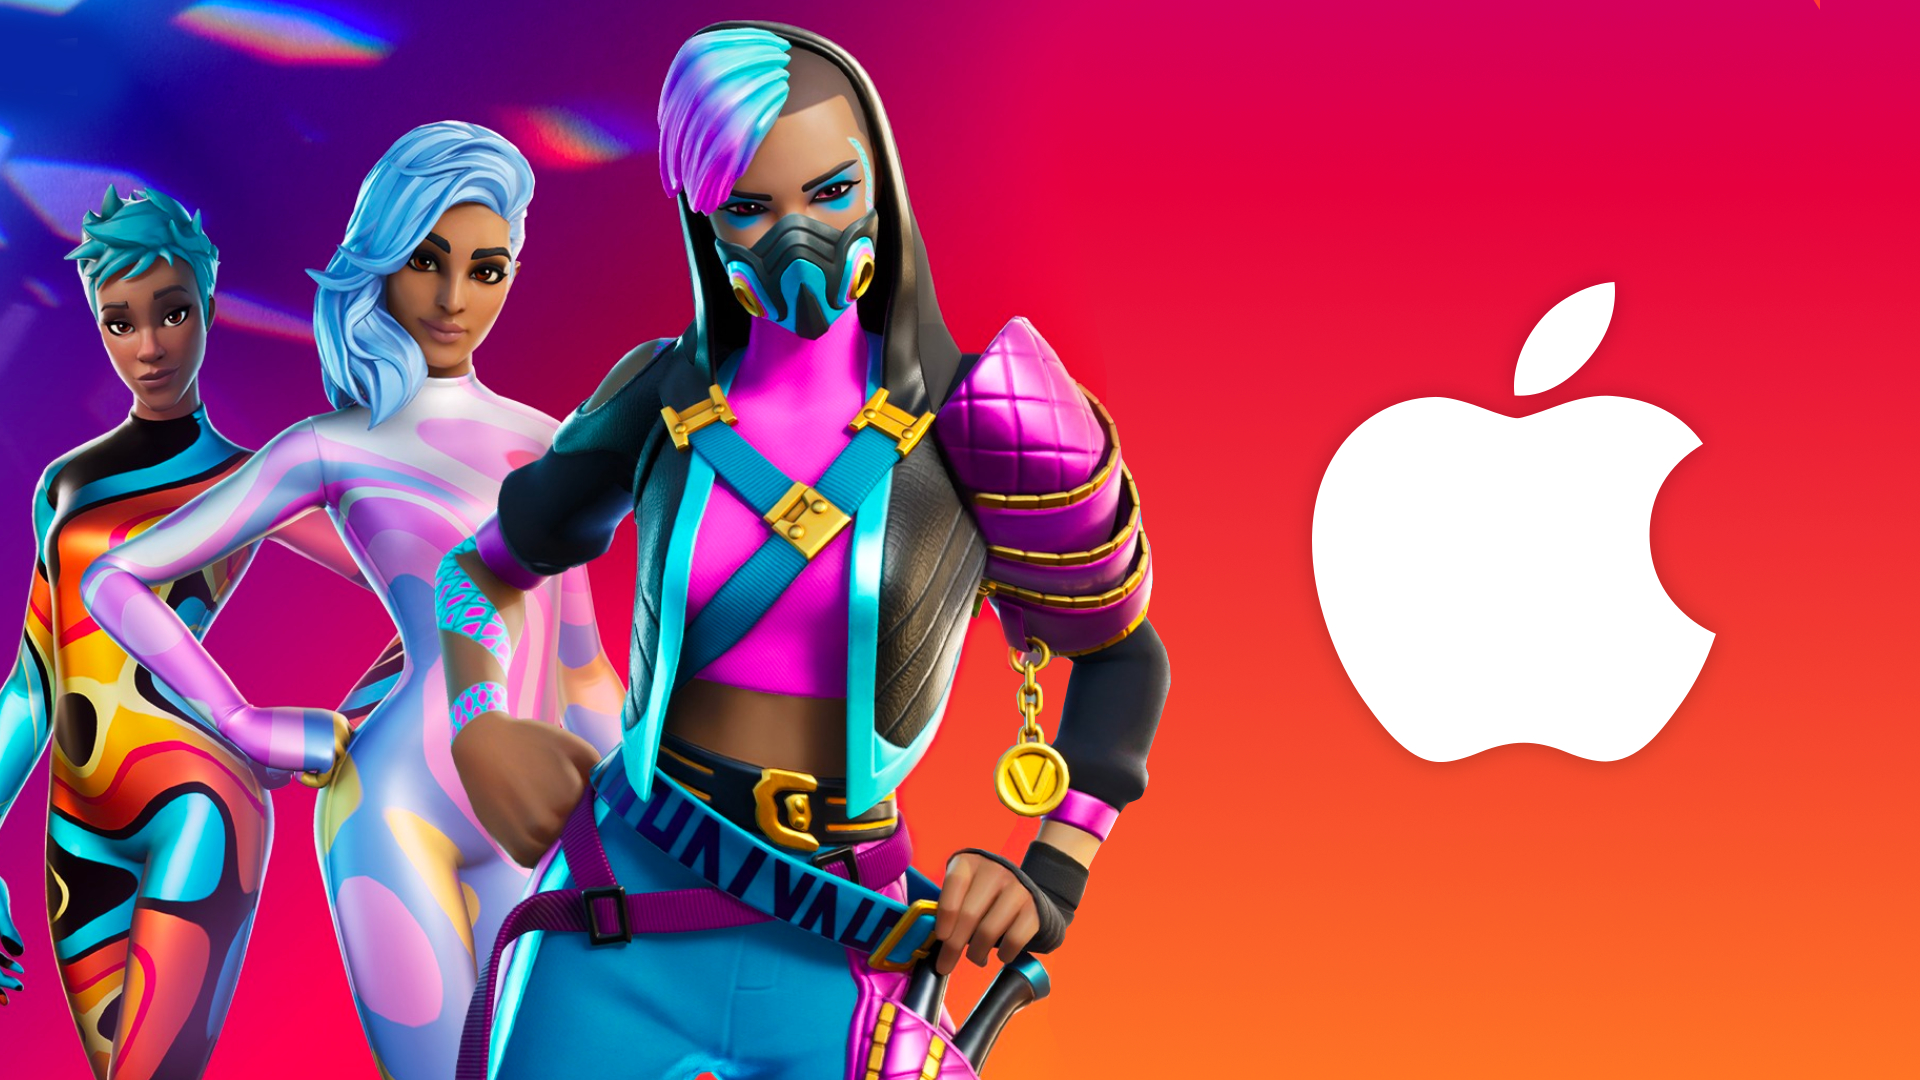 Epic Games Asks Court To Reverse Fortnite App Store Ban, Says Daily Active  iOS Users Have Dropped 60%